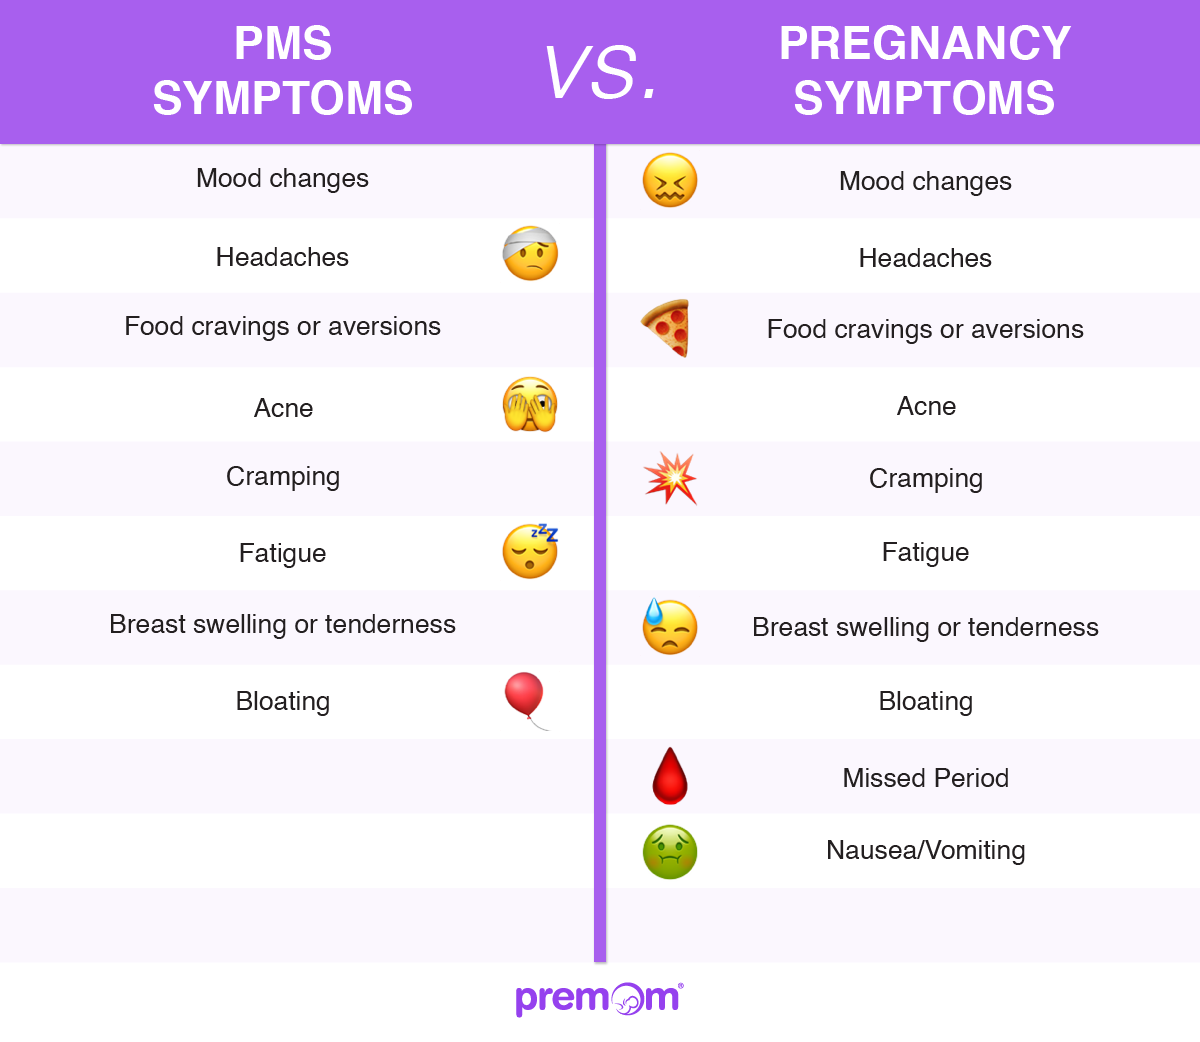 She Might - PMS vs Pregnancy: 12 Signs You Might be Pregnant (+ Chart)